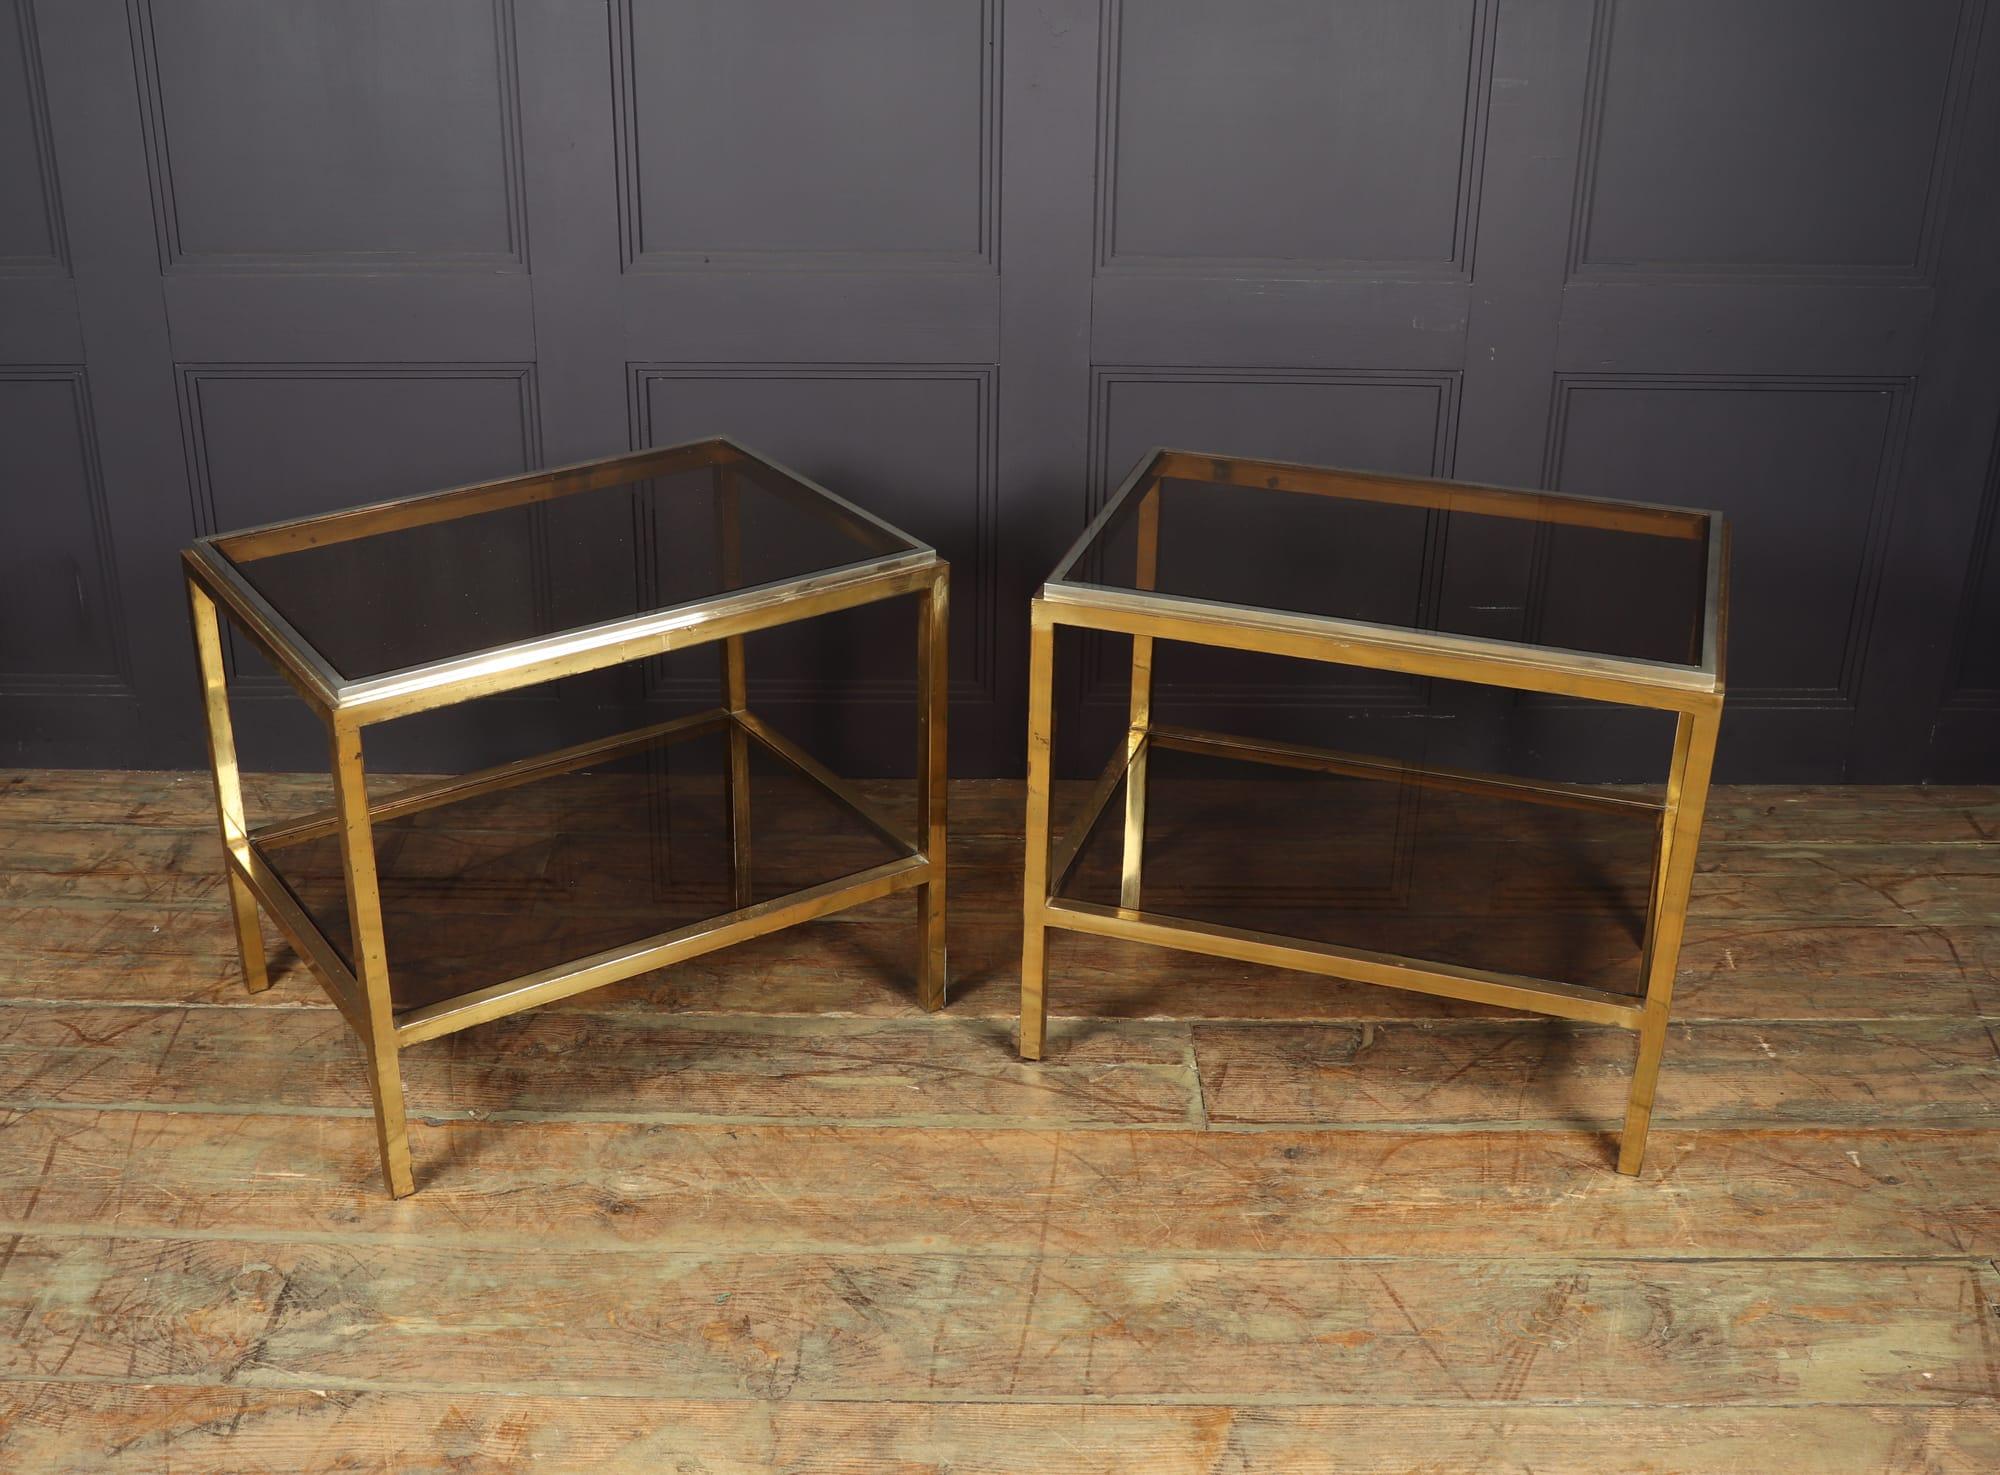 Italian Pair of Glass and Steel Side Tables in the Manner of Willy Rizzo, c1960